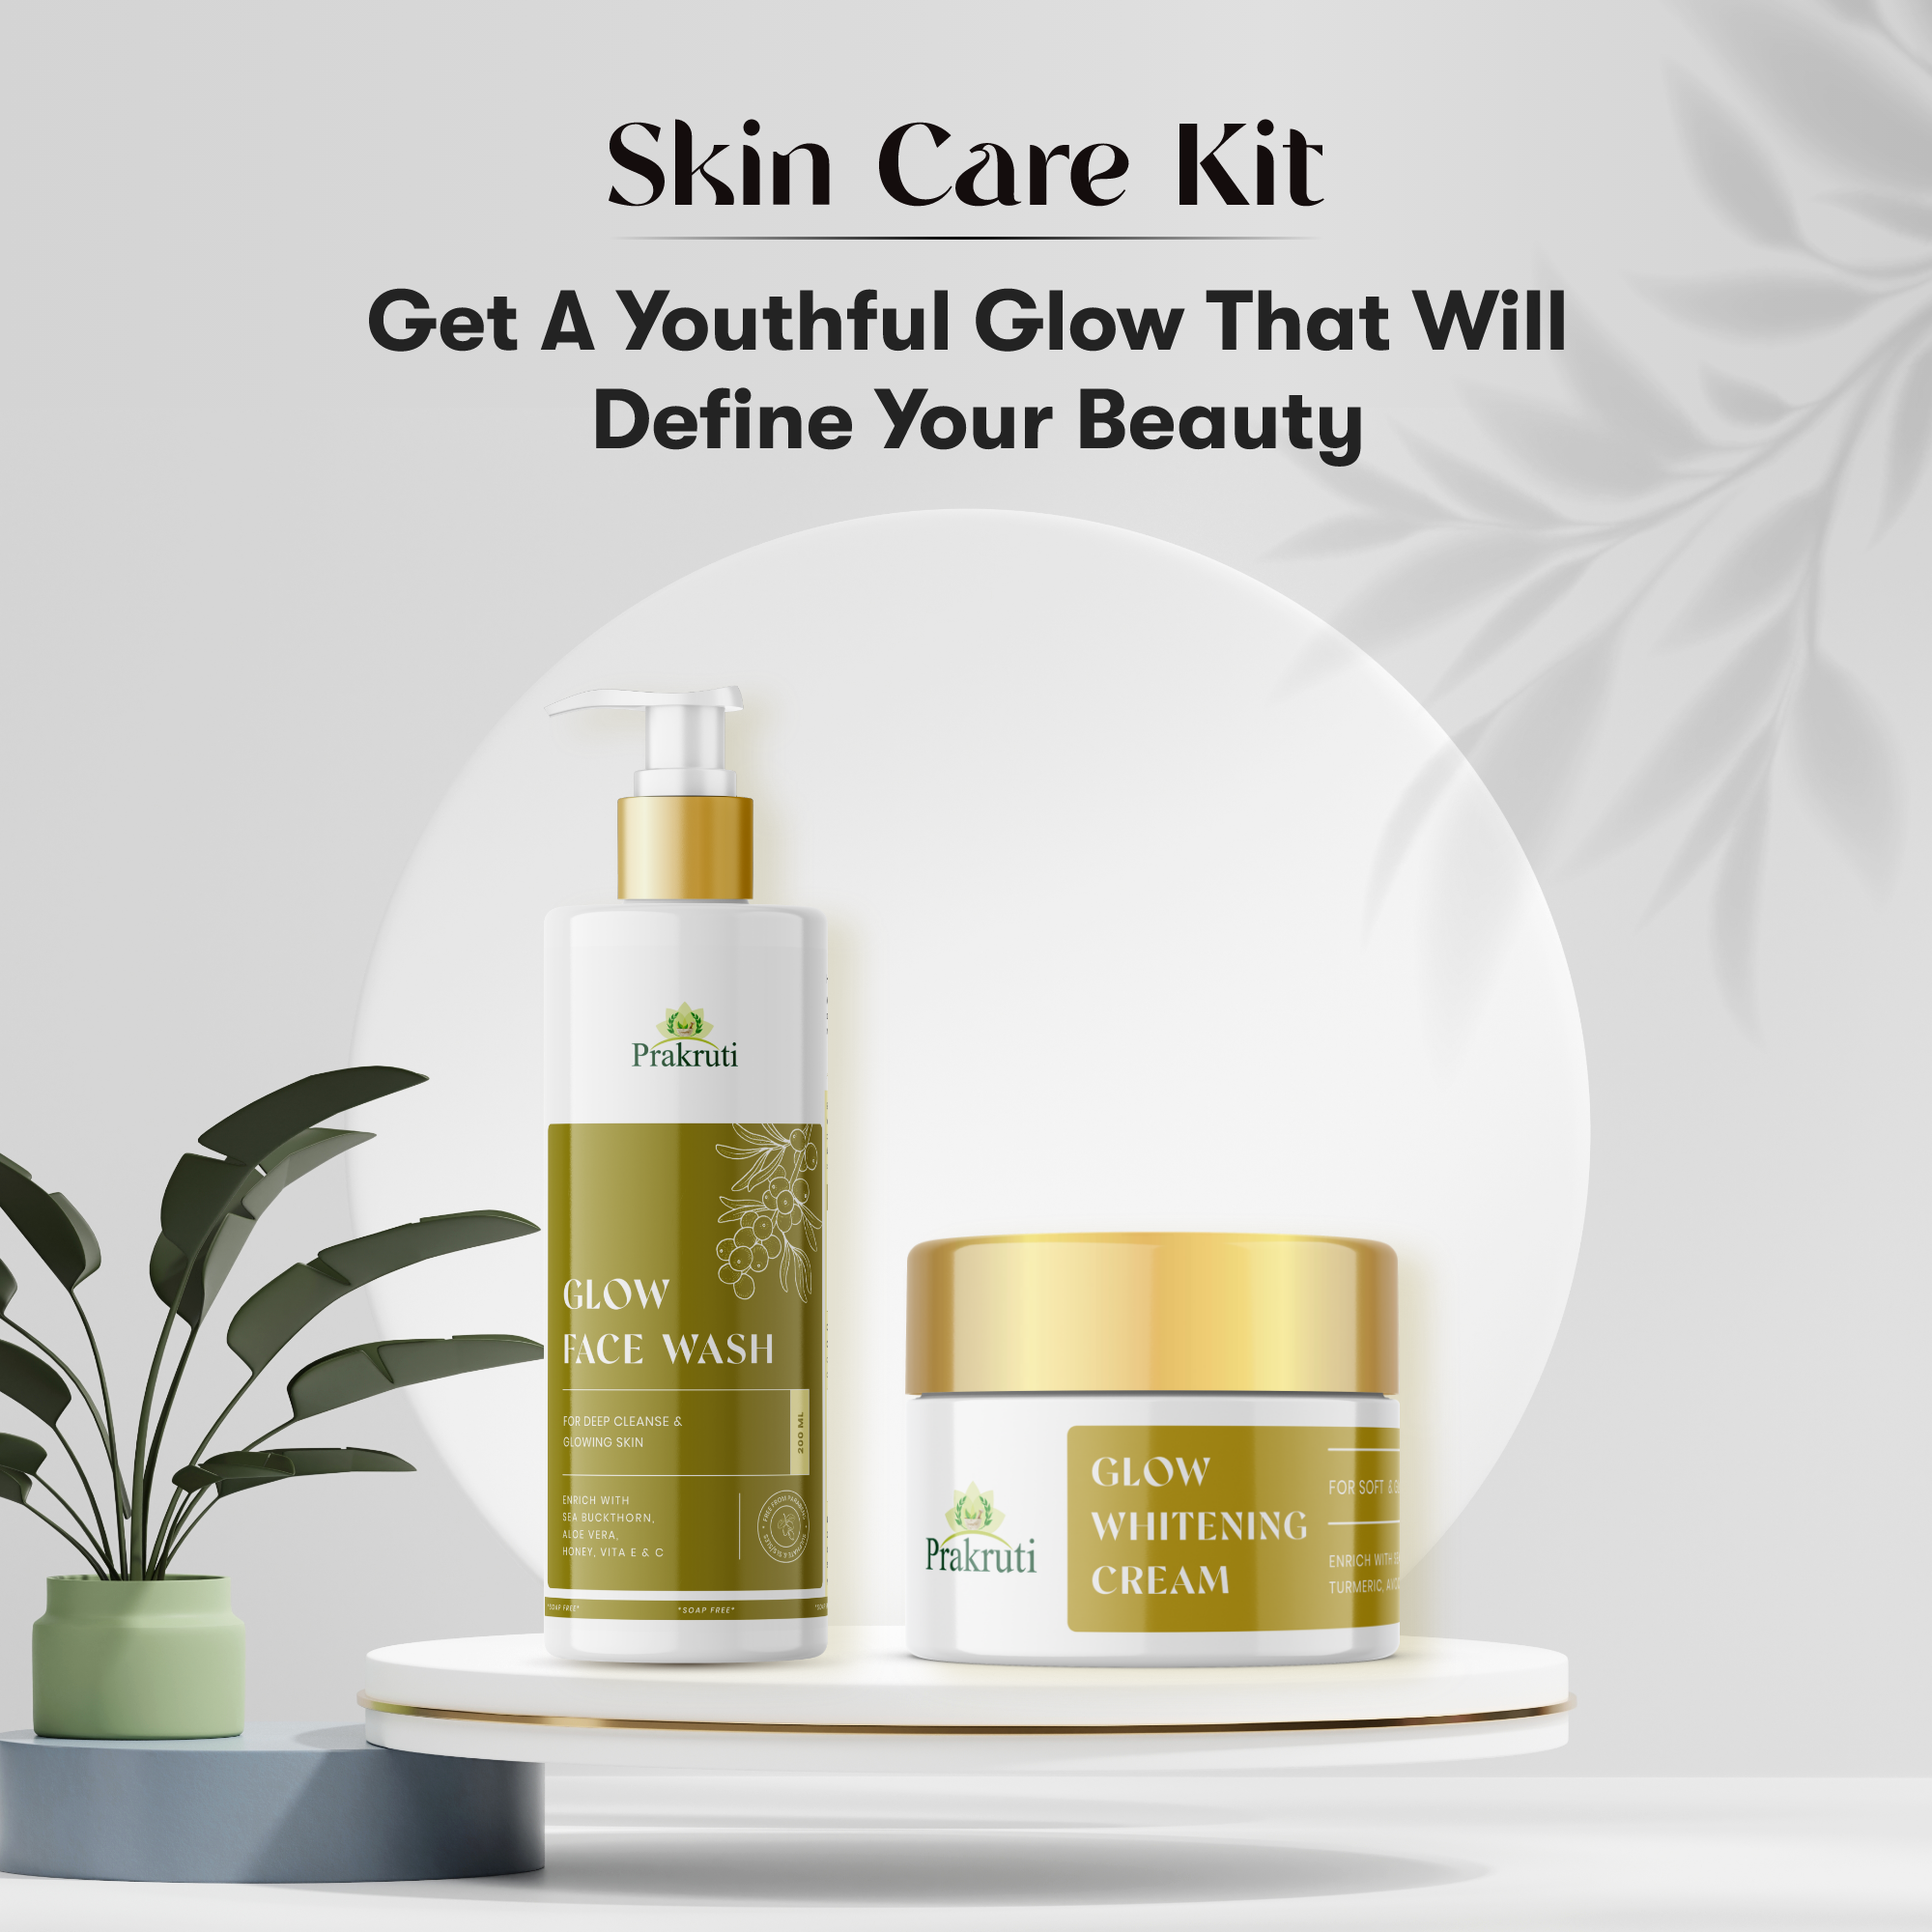 Glow Face wash and Glow Cream | Skin Care Kit